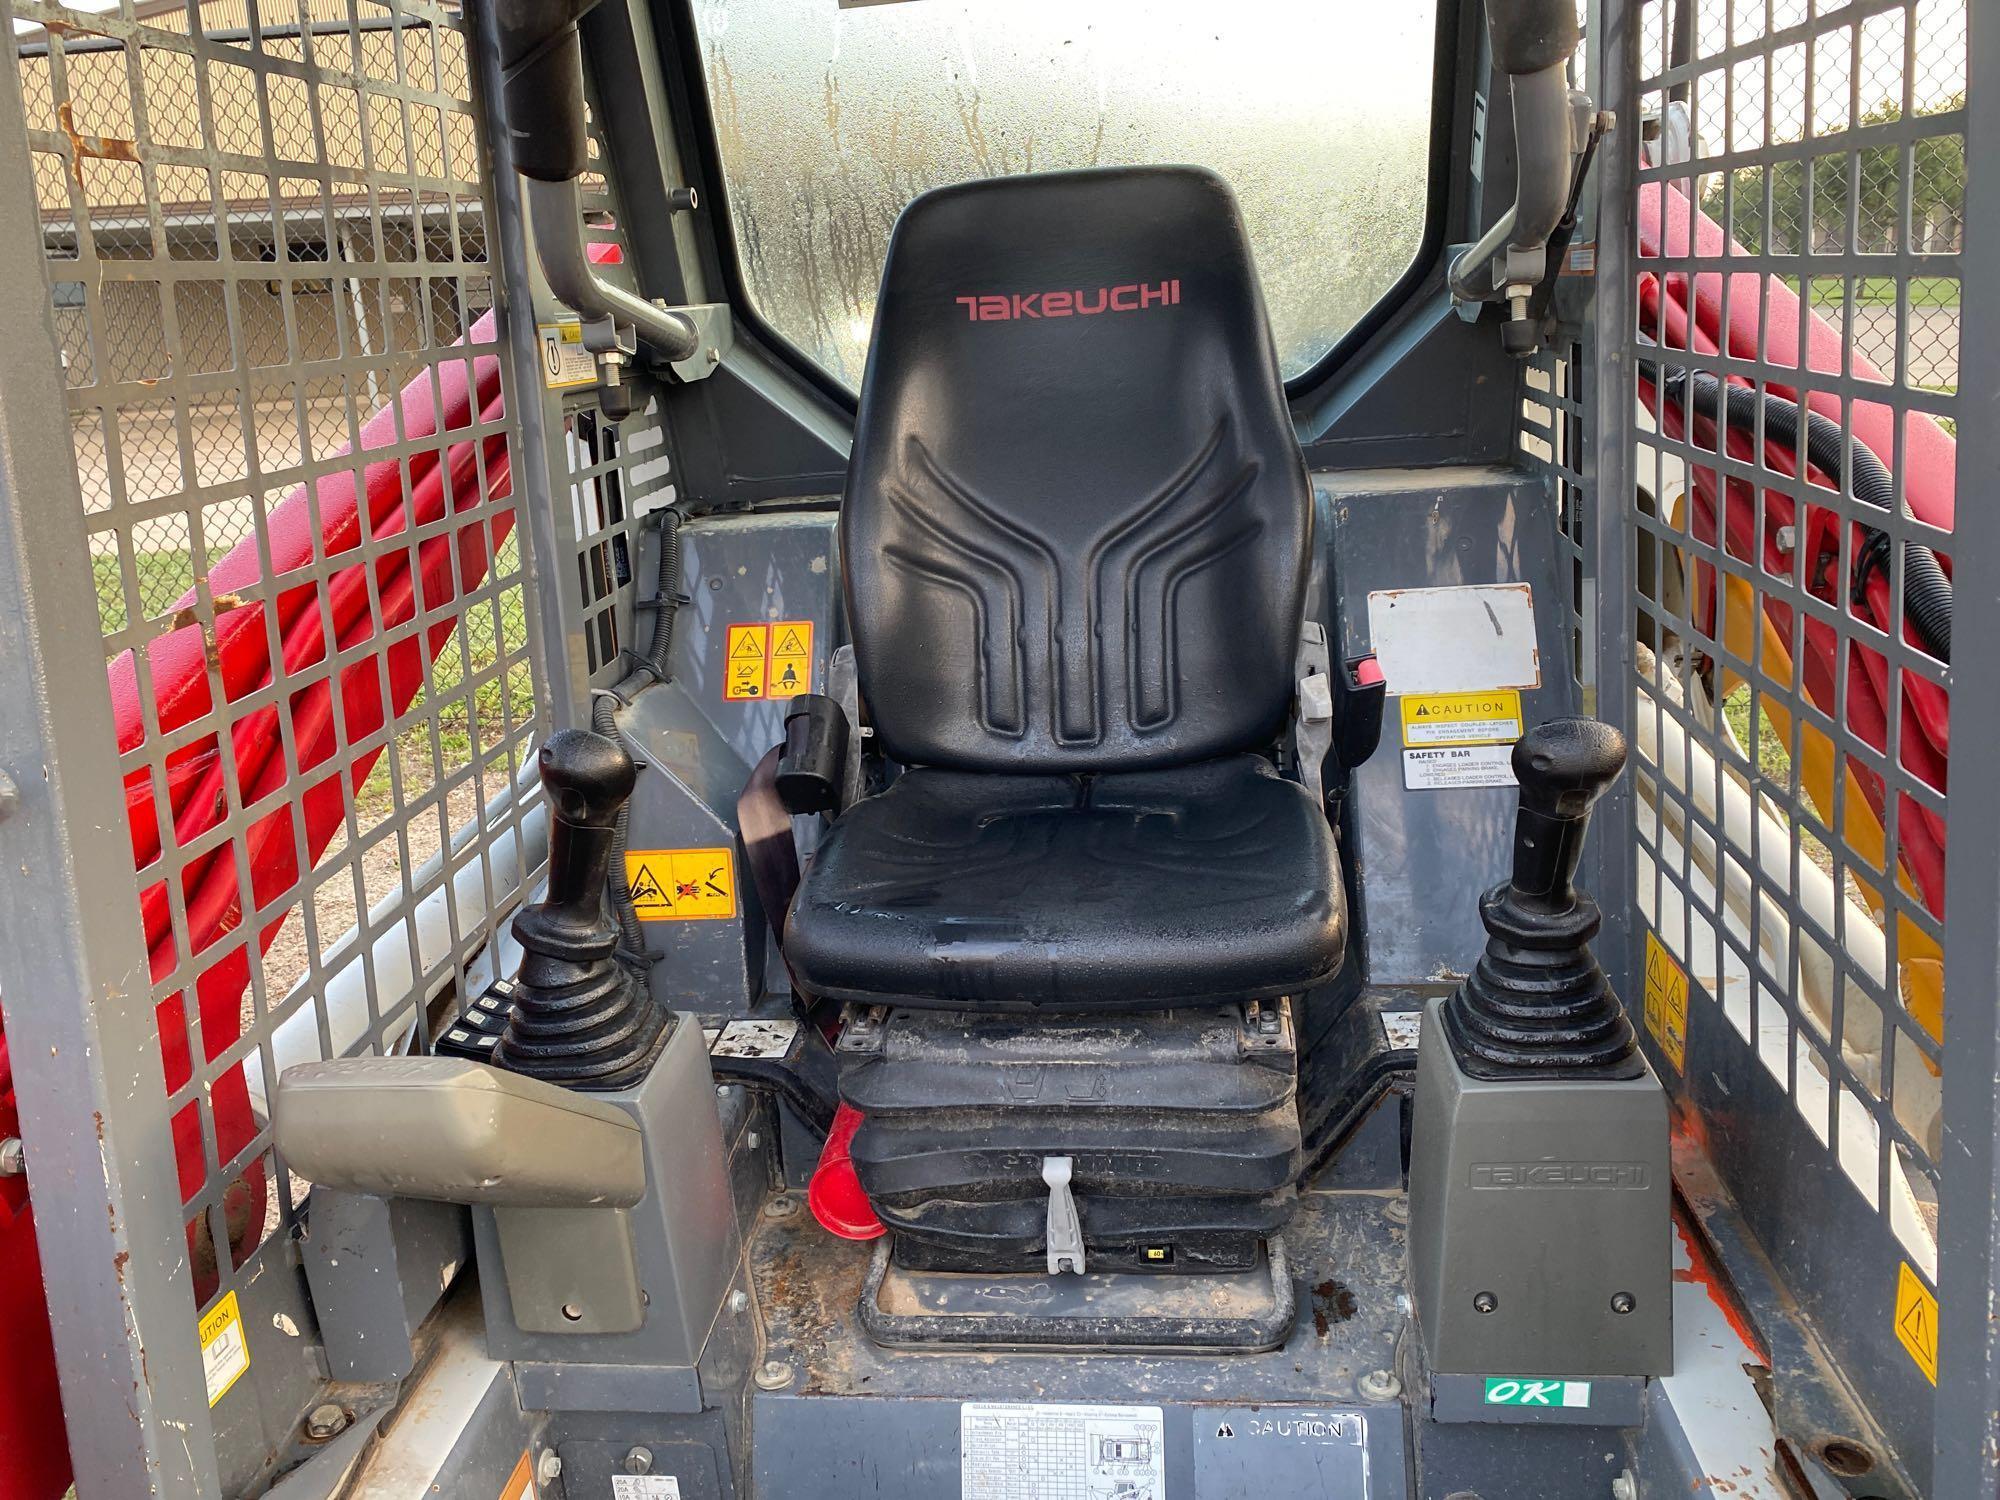 TAKEUCHI TL8 RUBBER TRACKED SKID STEER SN:9939 powered by diesel engine, equipped with rollcage,